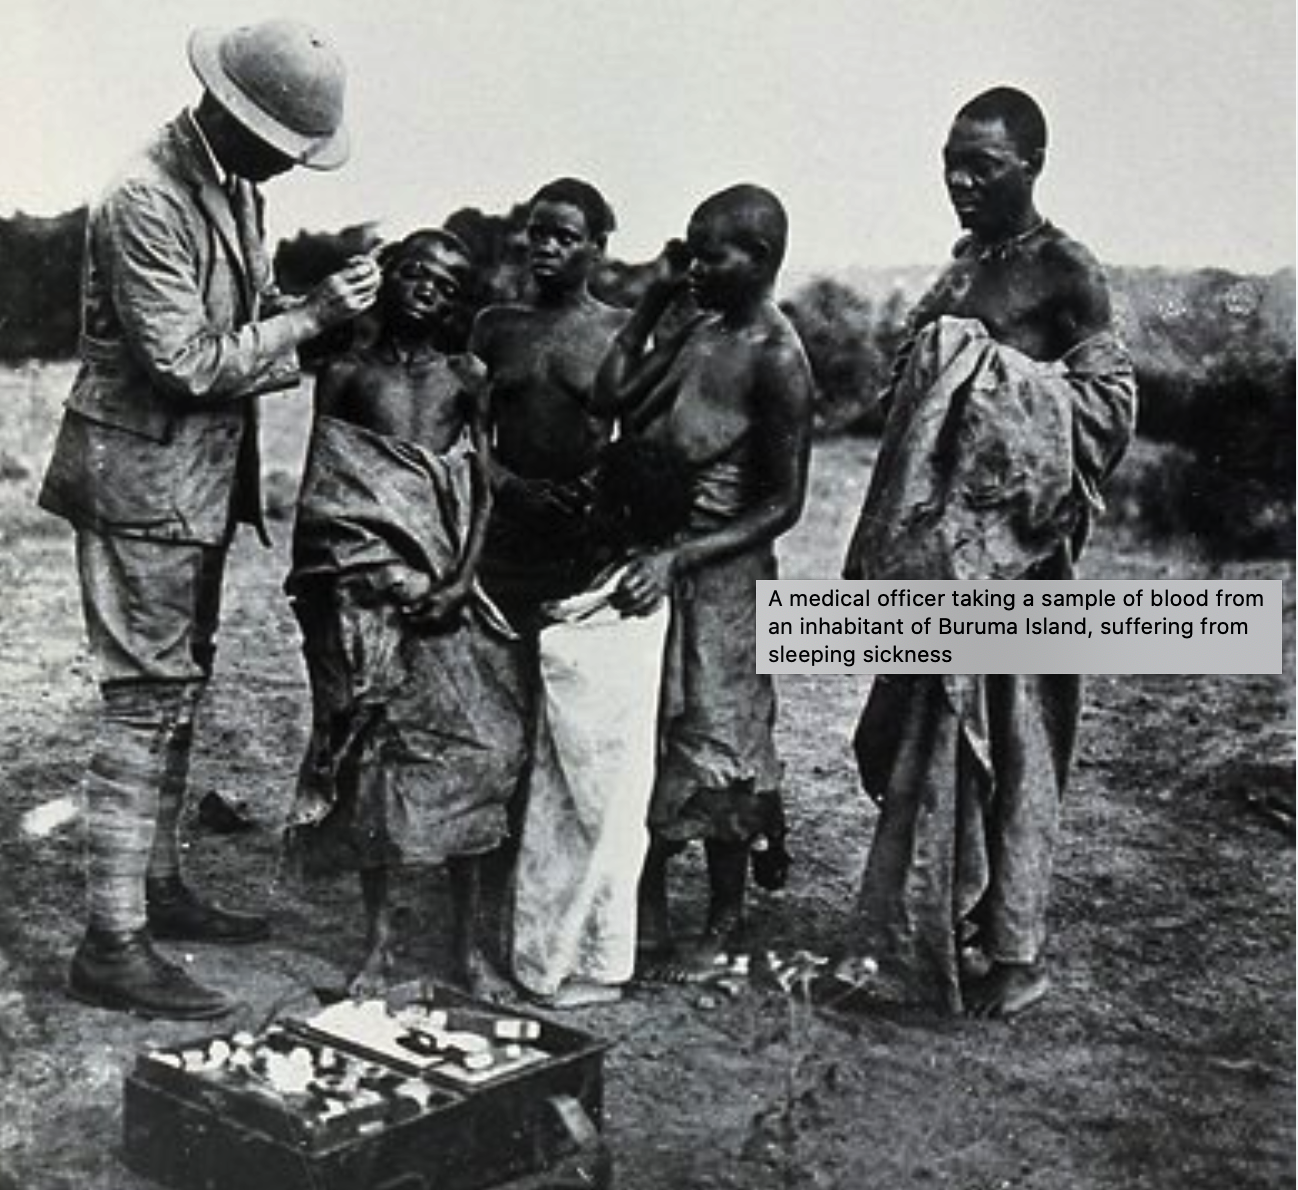 https://www.lookandlearn.com/history-images/YW029102V/A-medical-officer-taking-a-sample-of-blood-from-an-inhabitant-of-Buruma-Island-suffering-from-sleeping-sickness